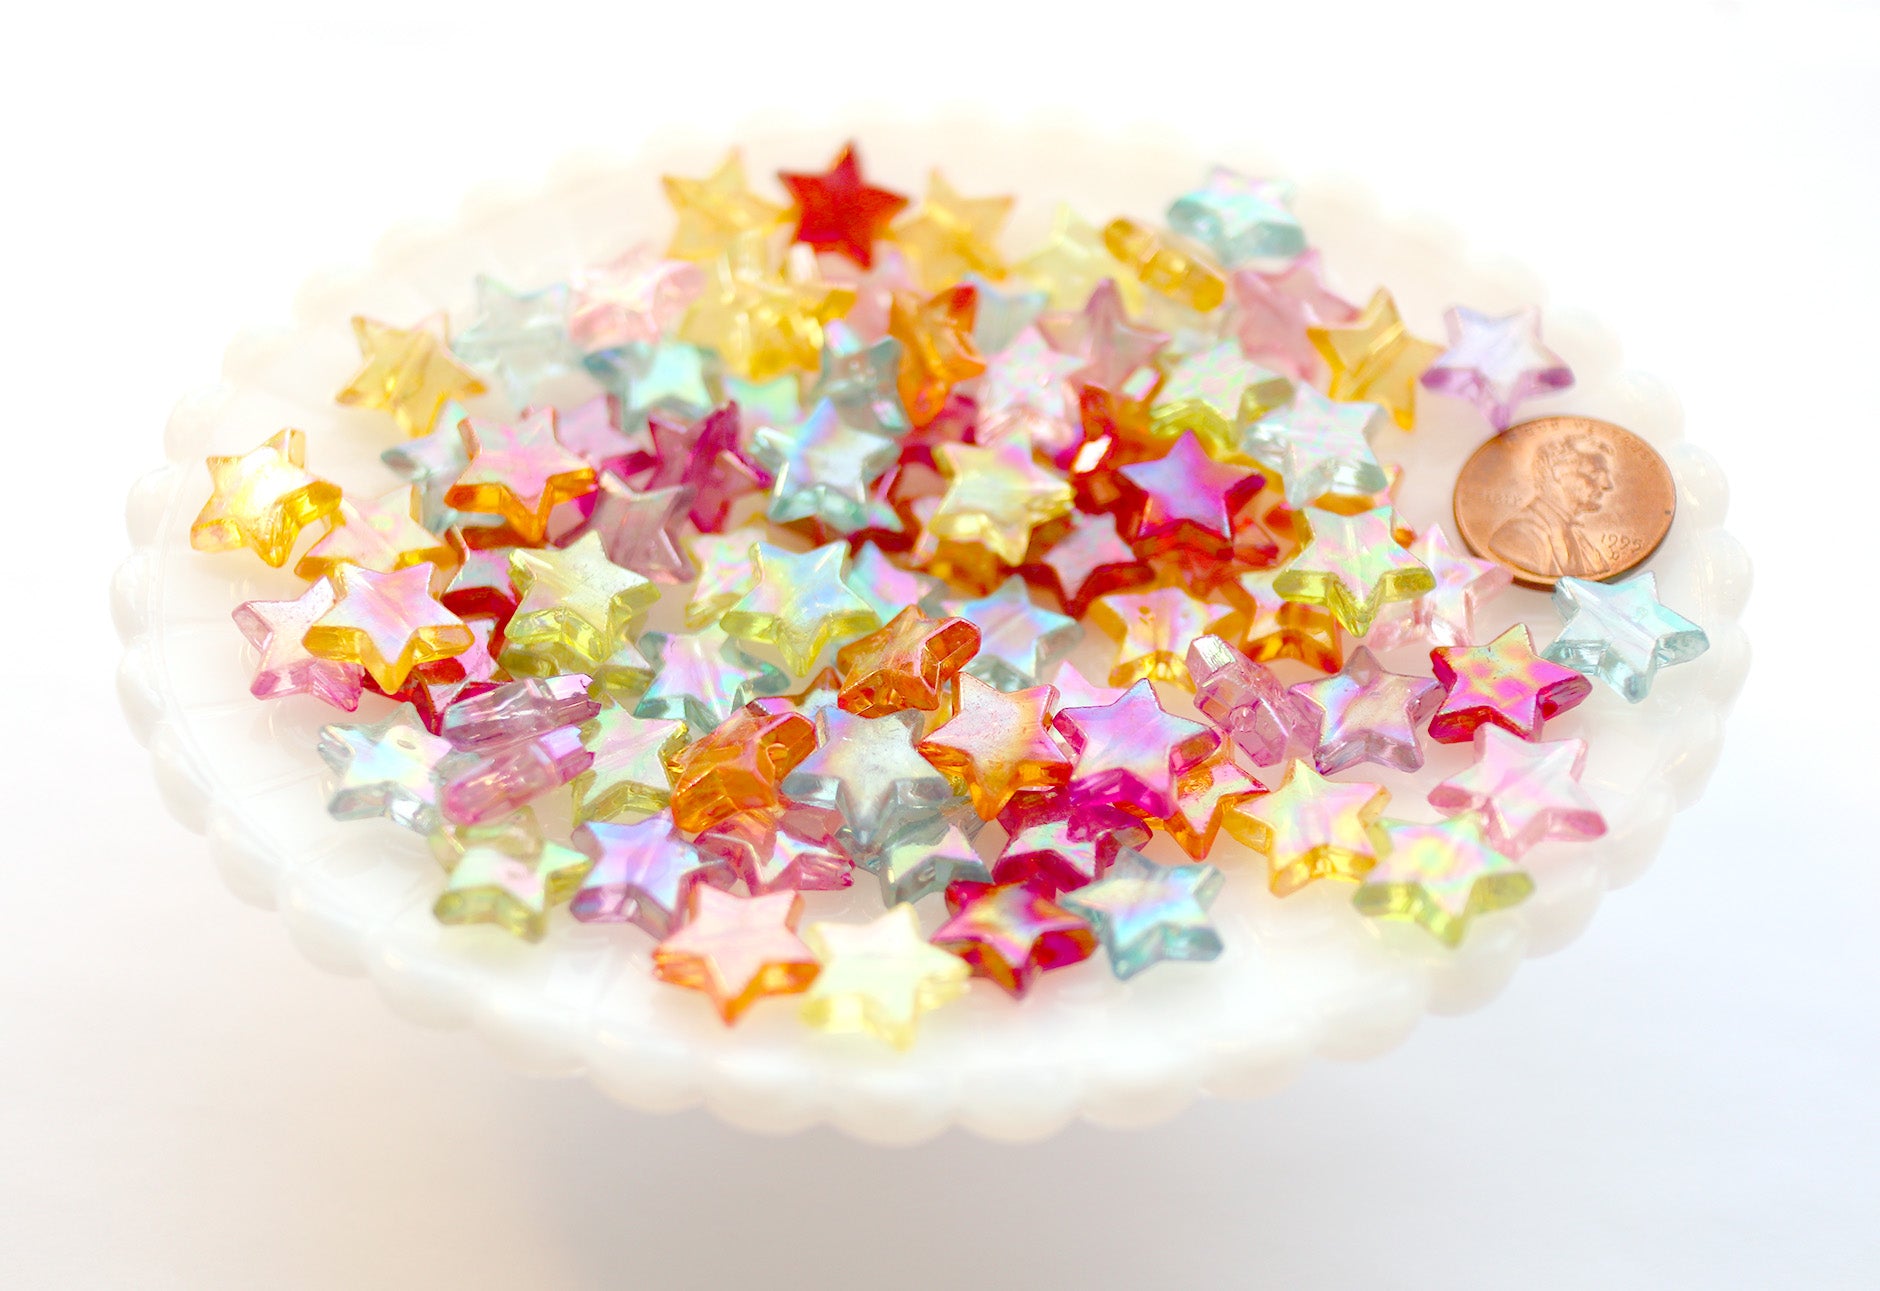 Butterfly Beads - 14mm AB Translucent Iridescent Color Little Butterfl –  Delish Beads